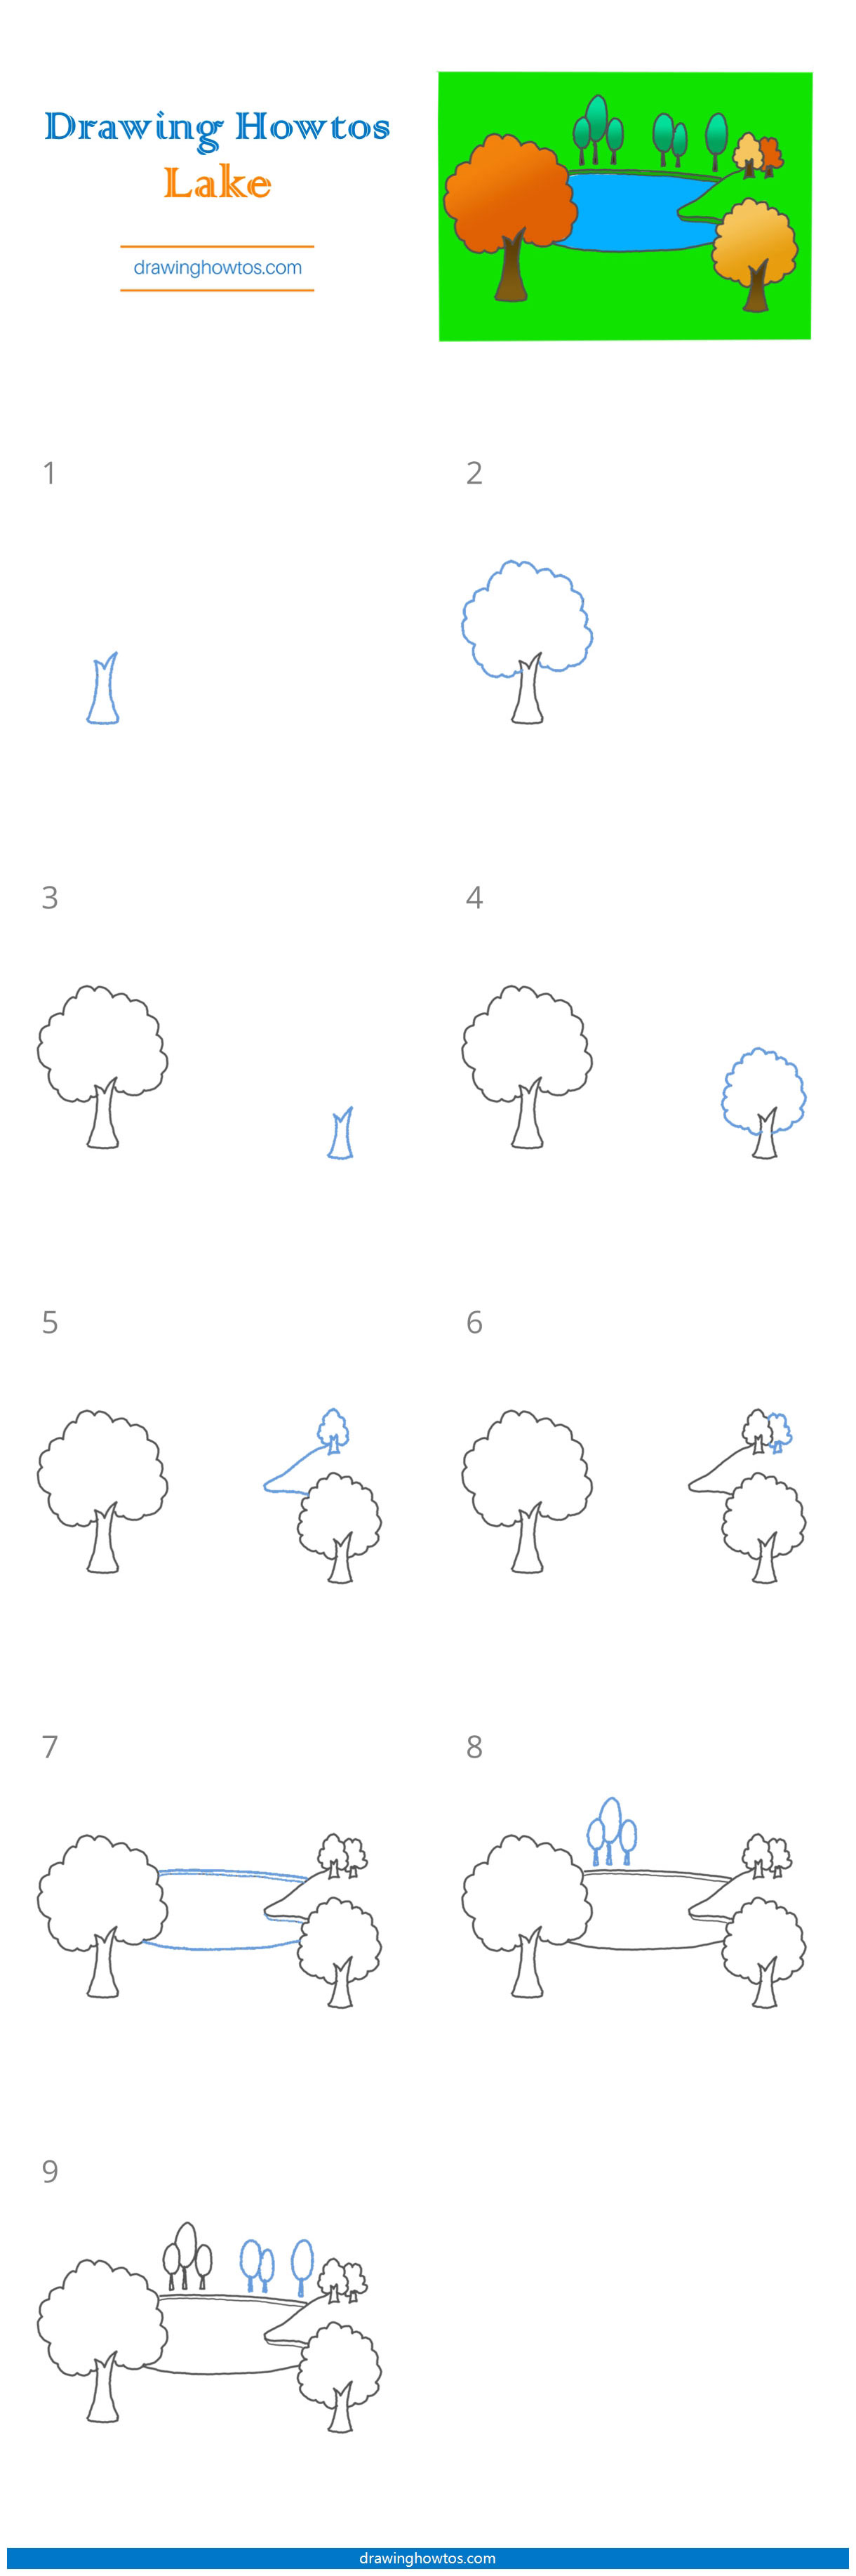 How to Draw a Lake Step by Step